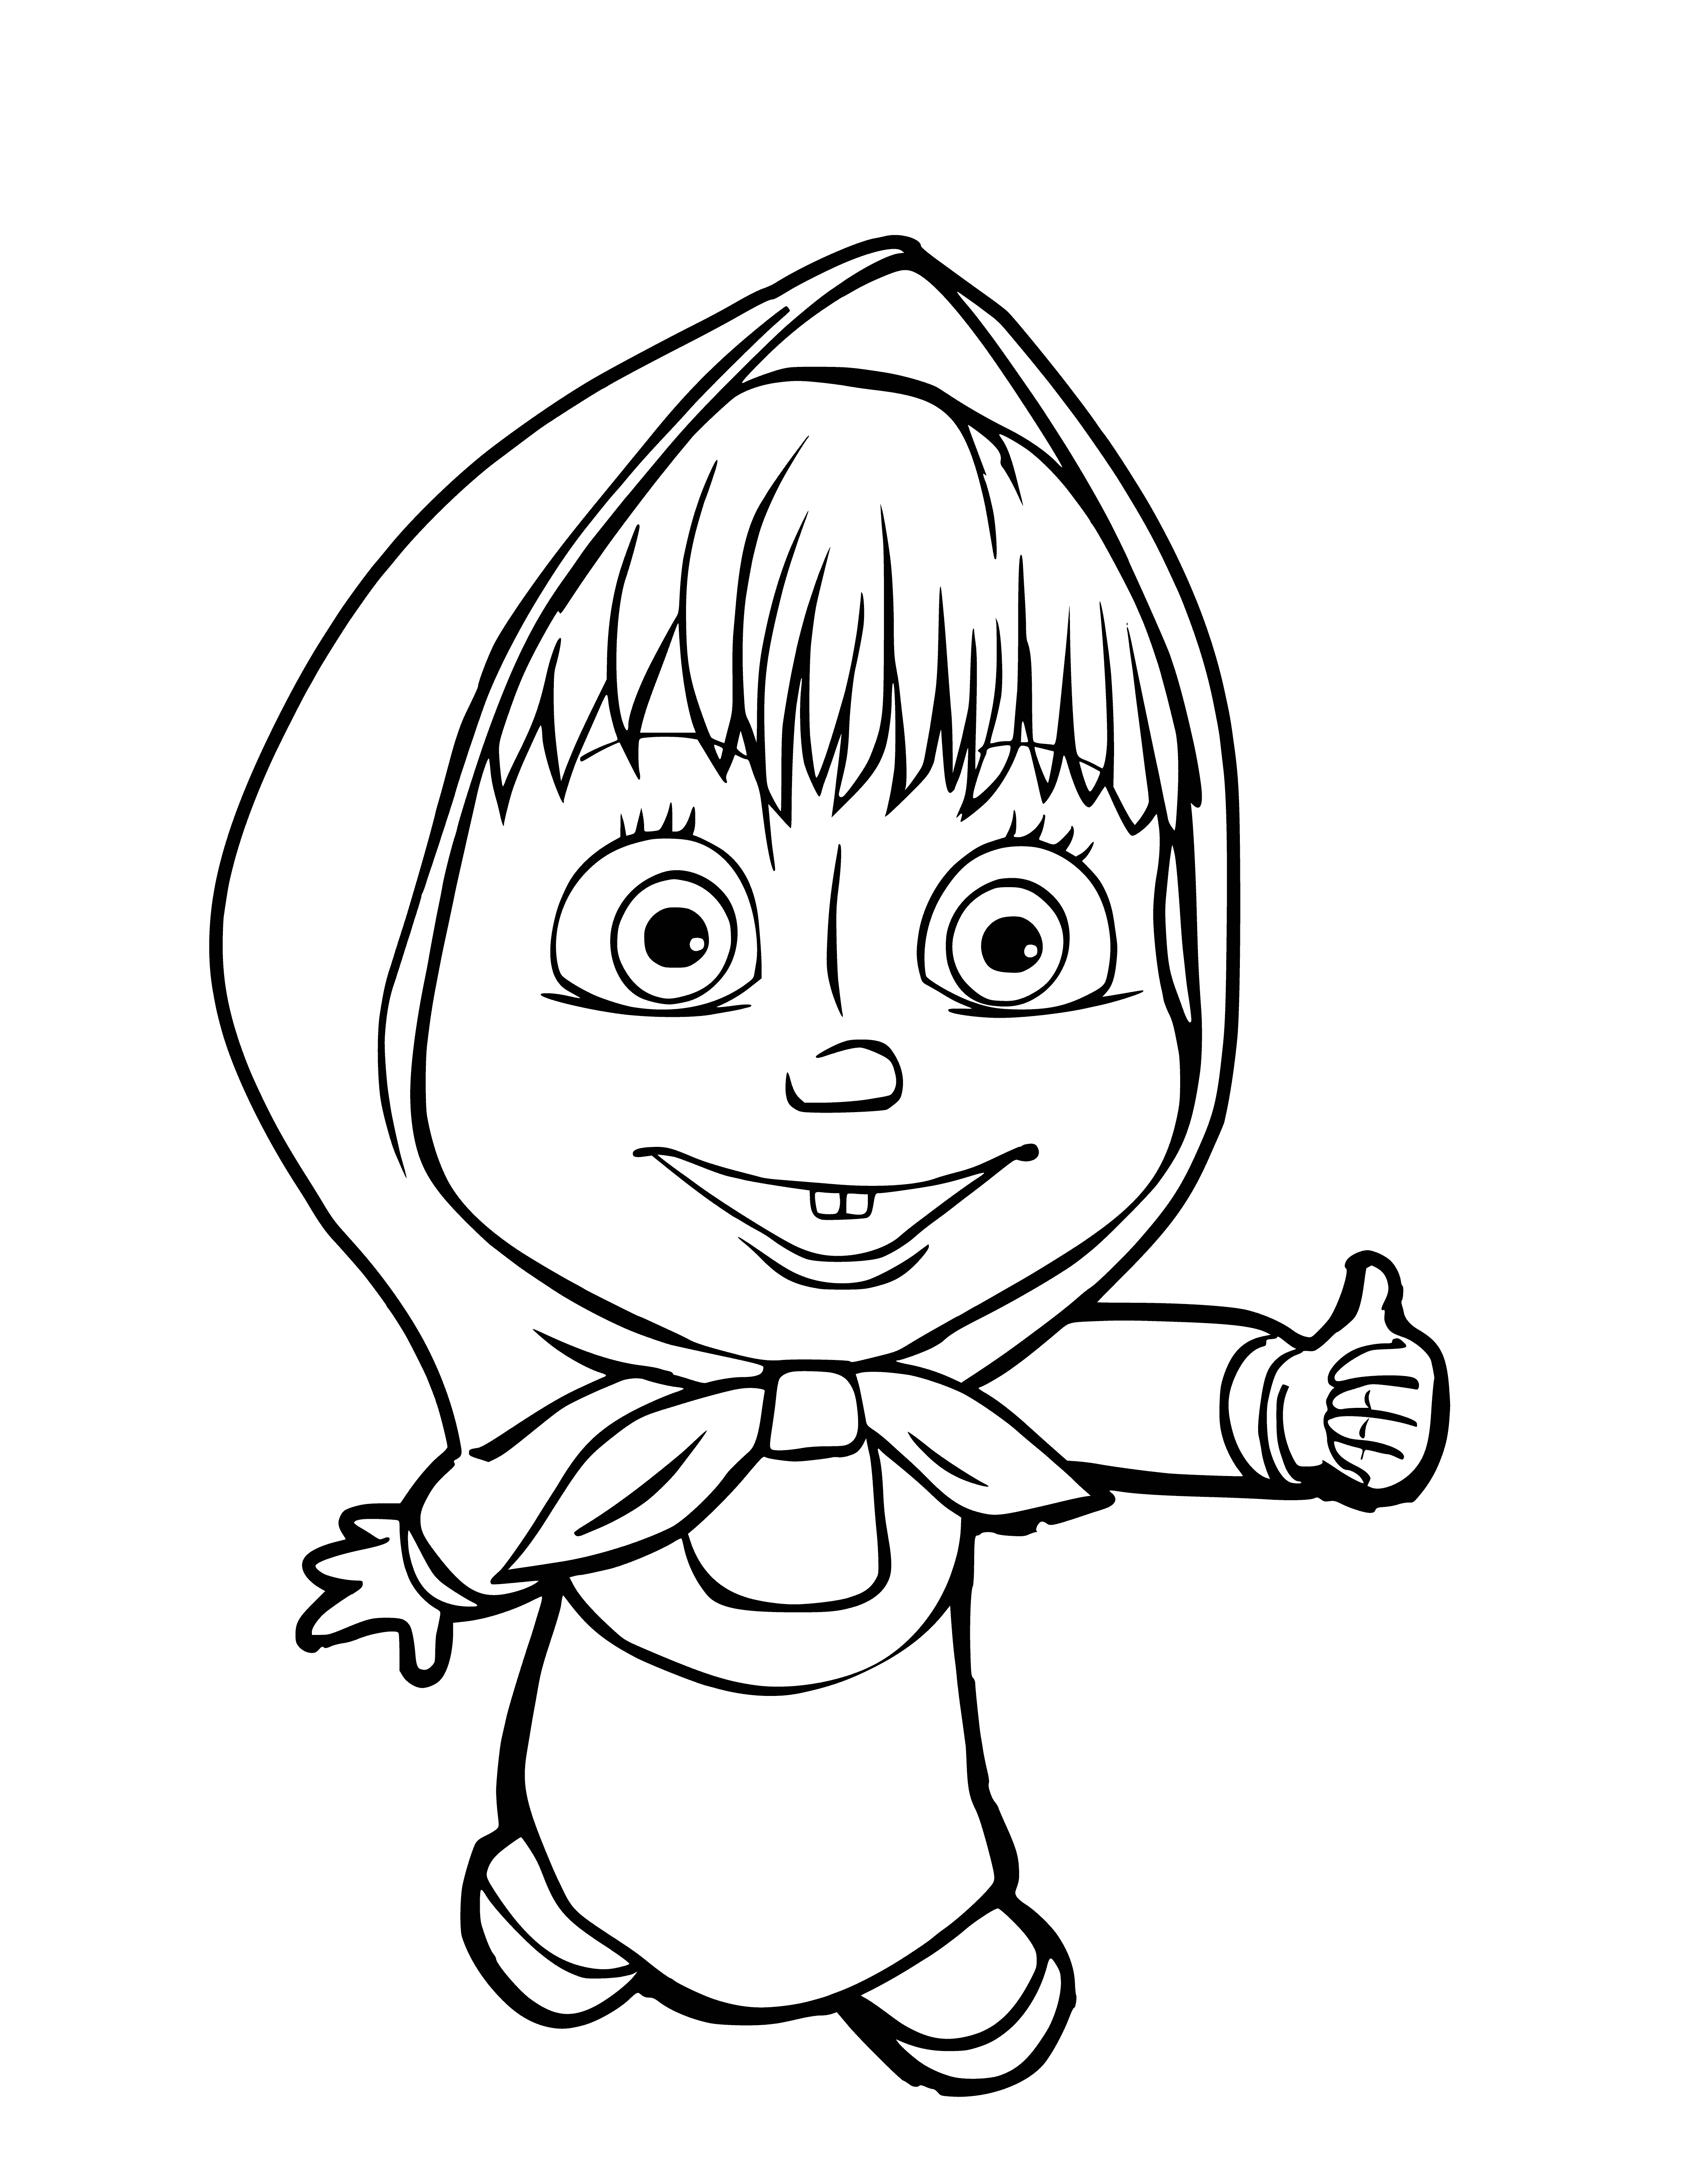 coloring page: Masha, a little girl in a red dress and shoes, spots a bear behind a tree.